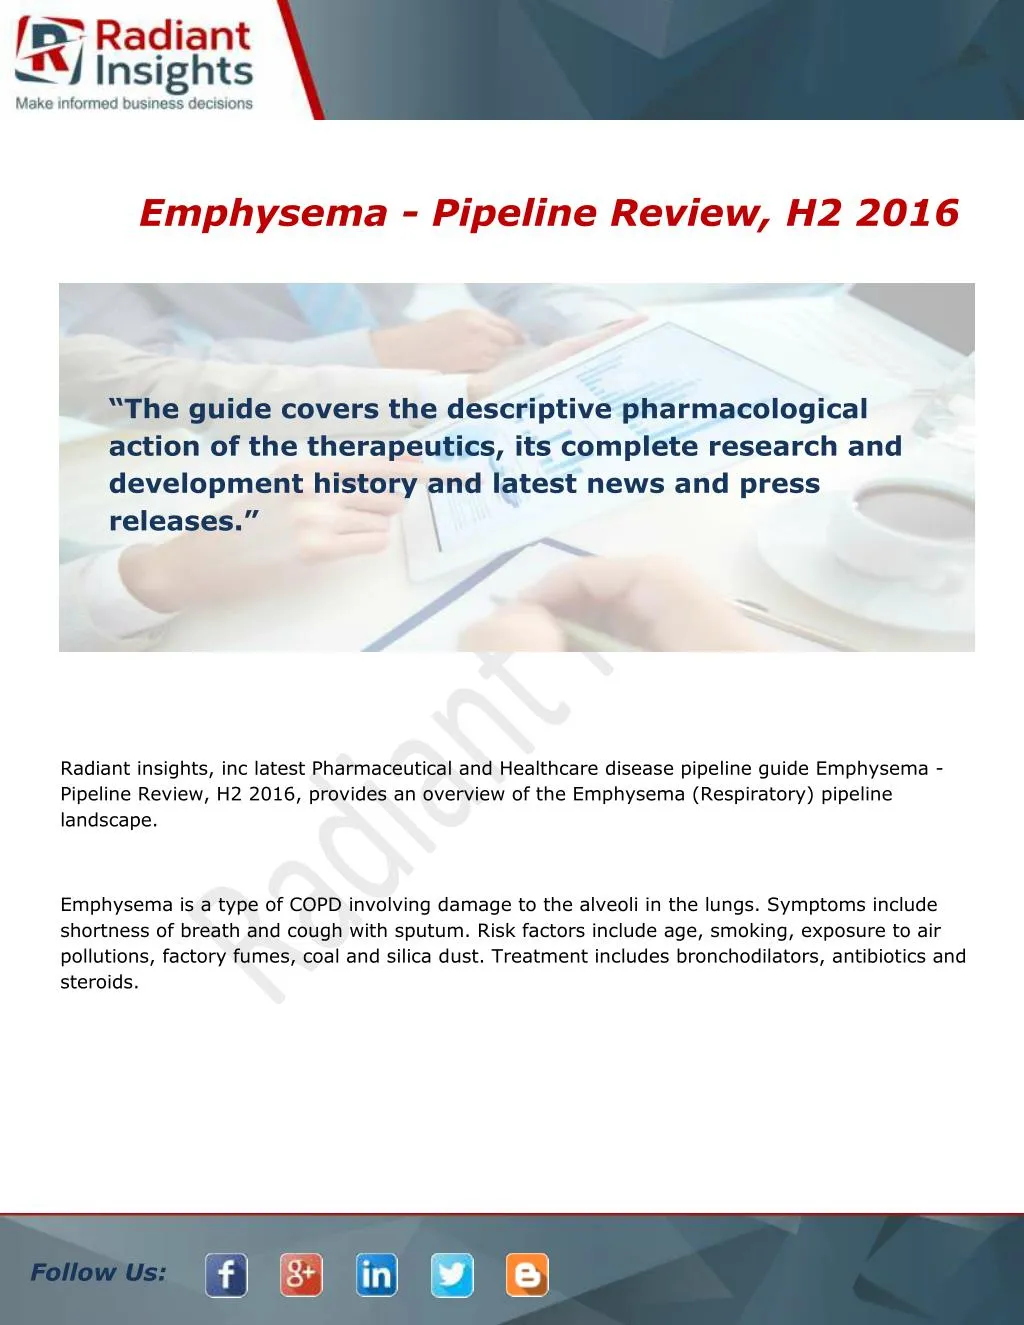 emphysema pipeline review h2 2016